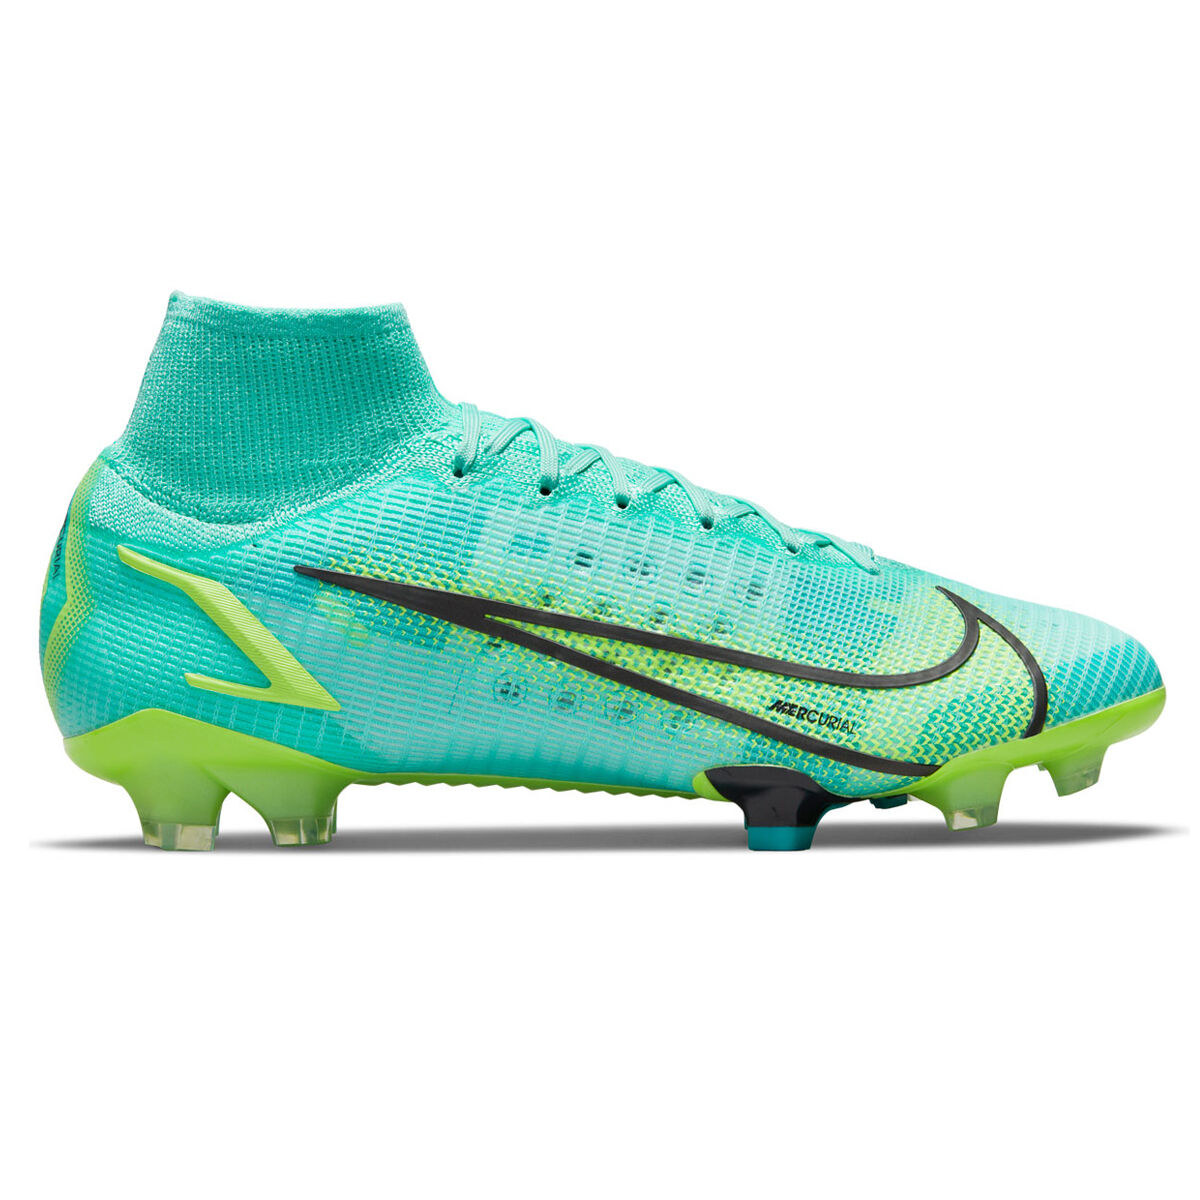 superfly mercurial boots